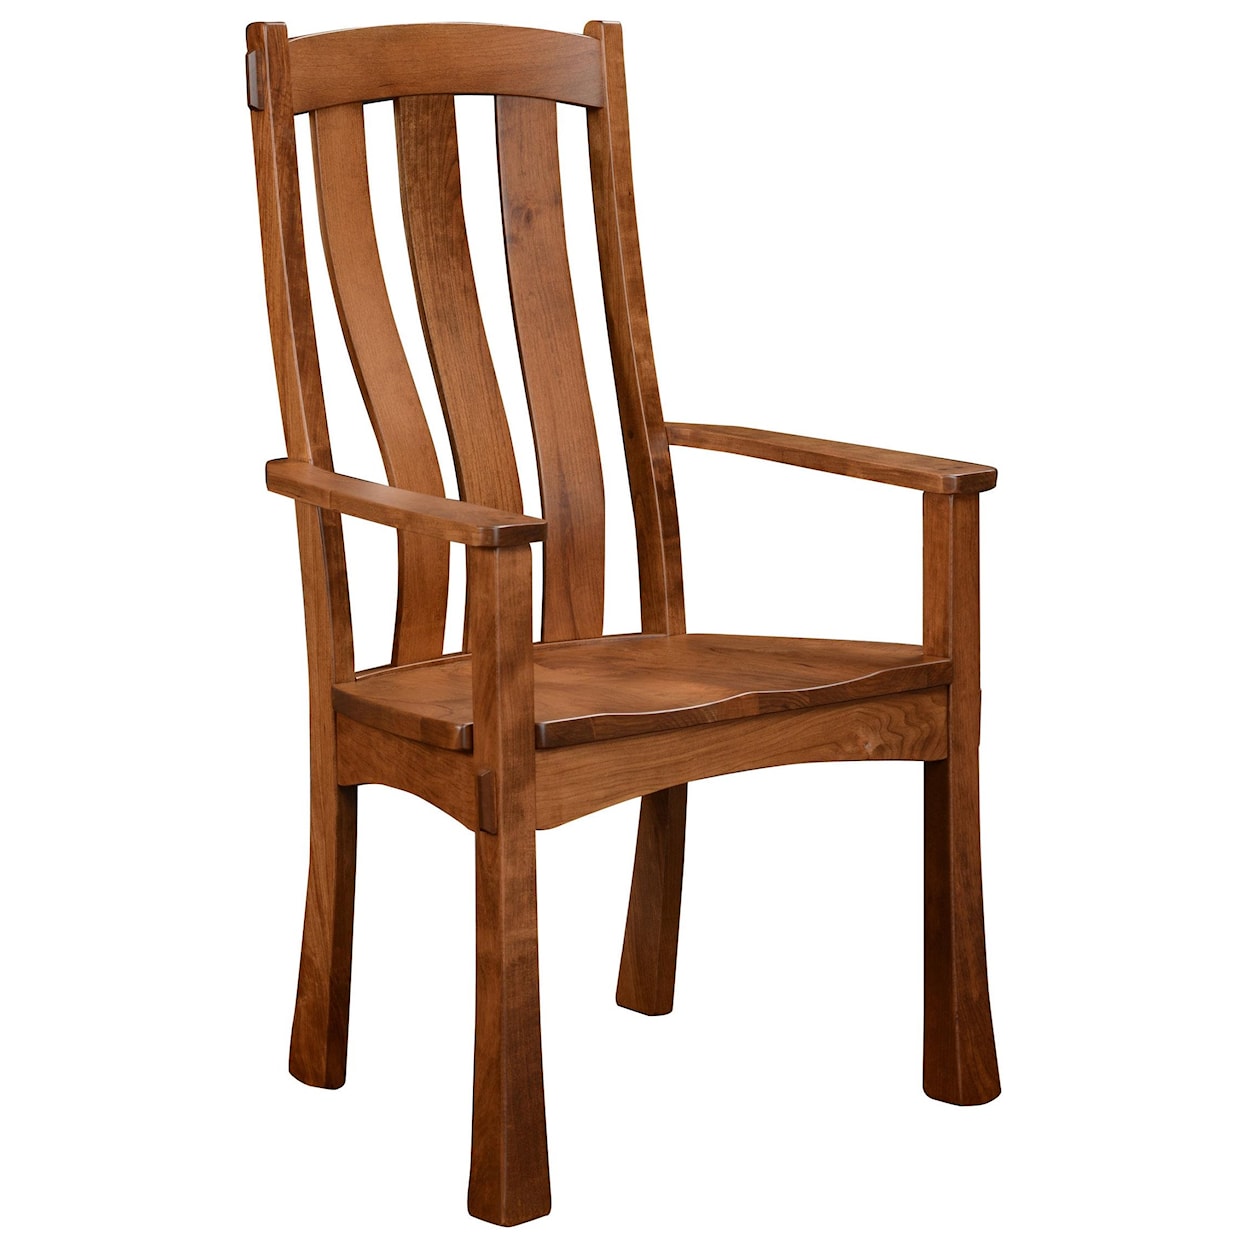 Wengerd Wood Products Monarch Arm Chair